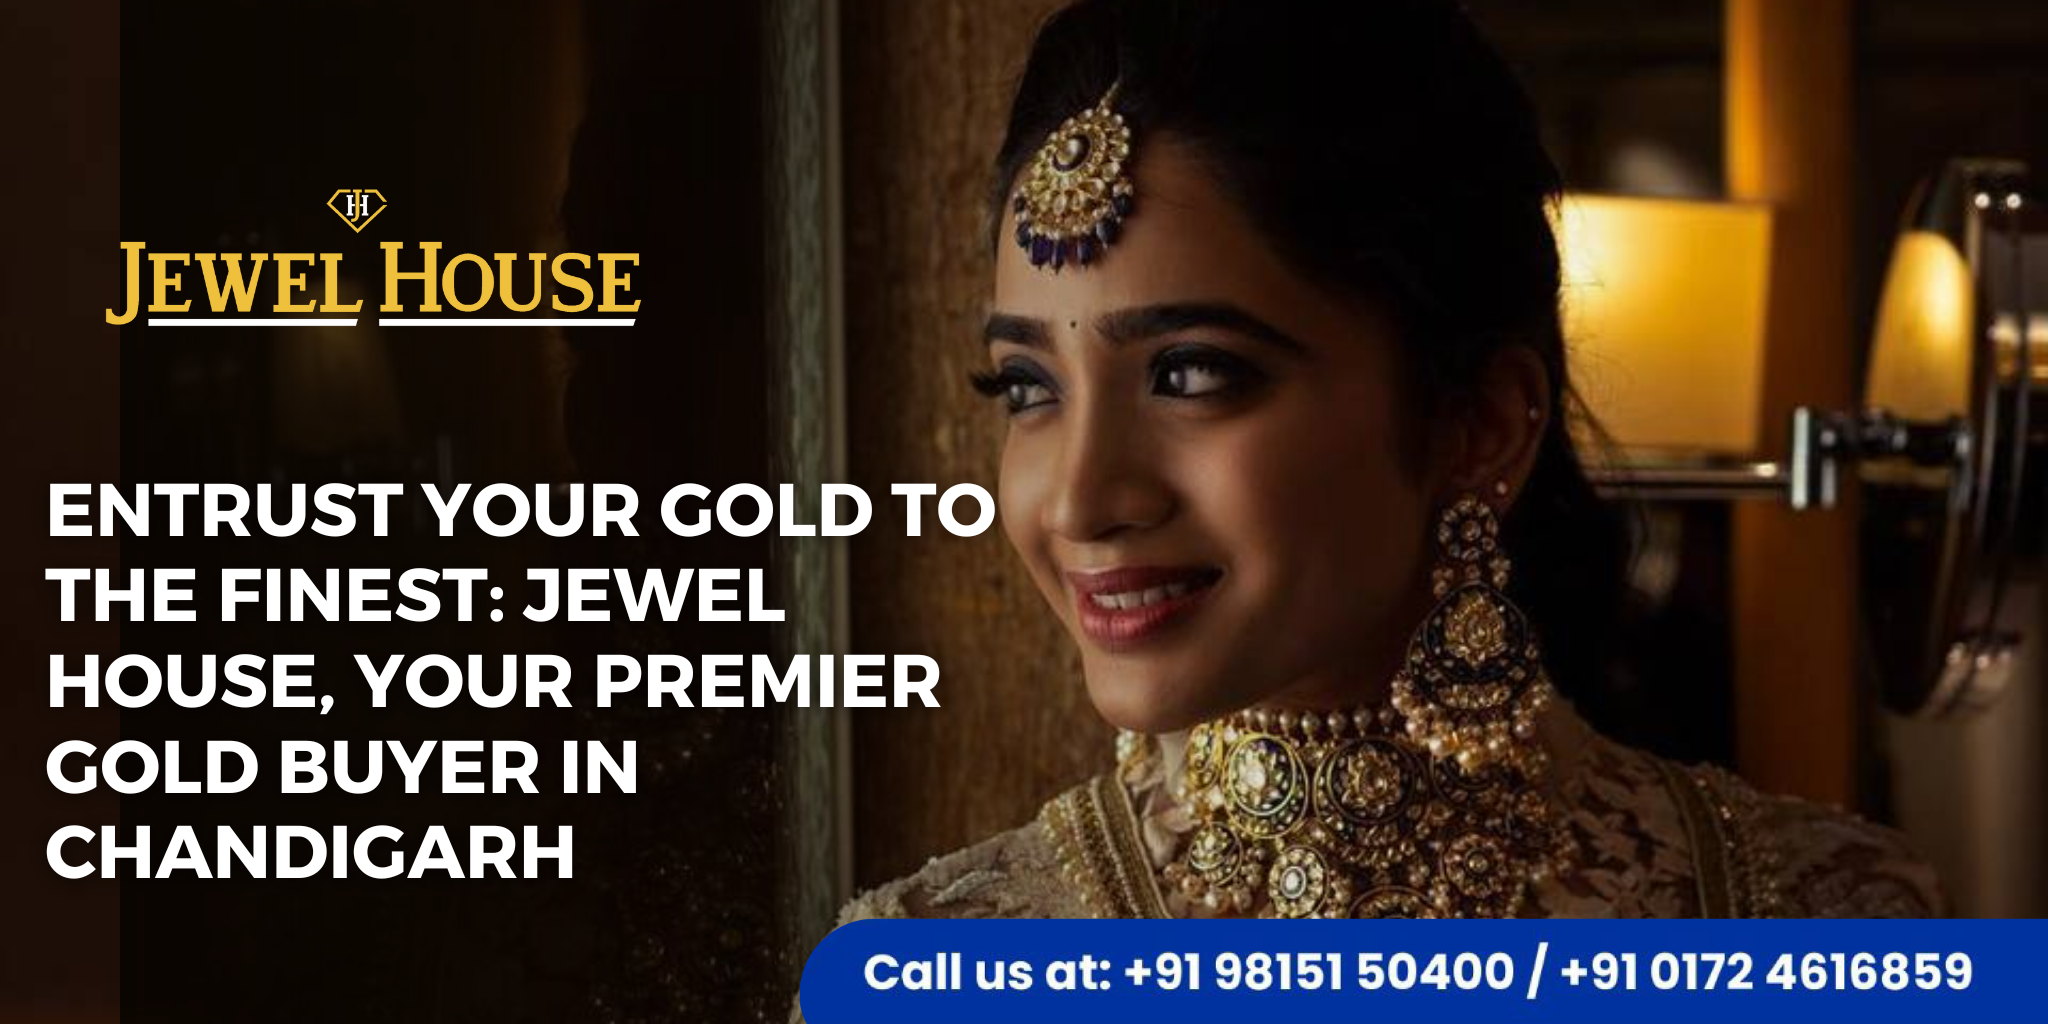 Entrust Your Gold to the Finest: Jewel House, Your Premier Gold Buyer in Chandigarh